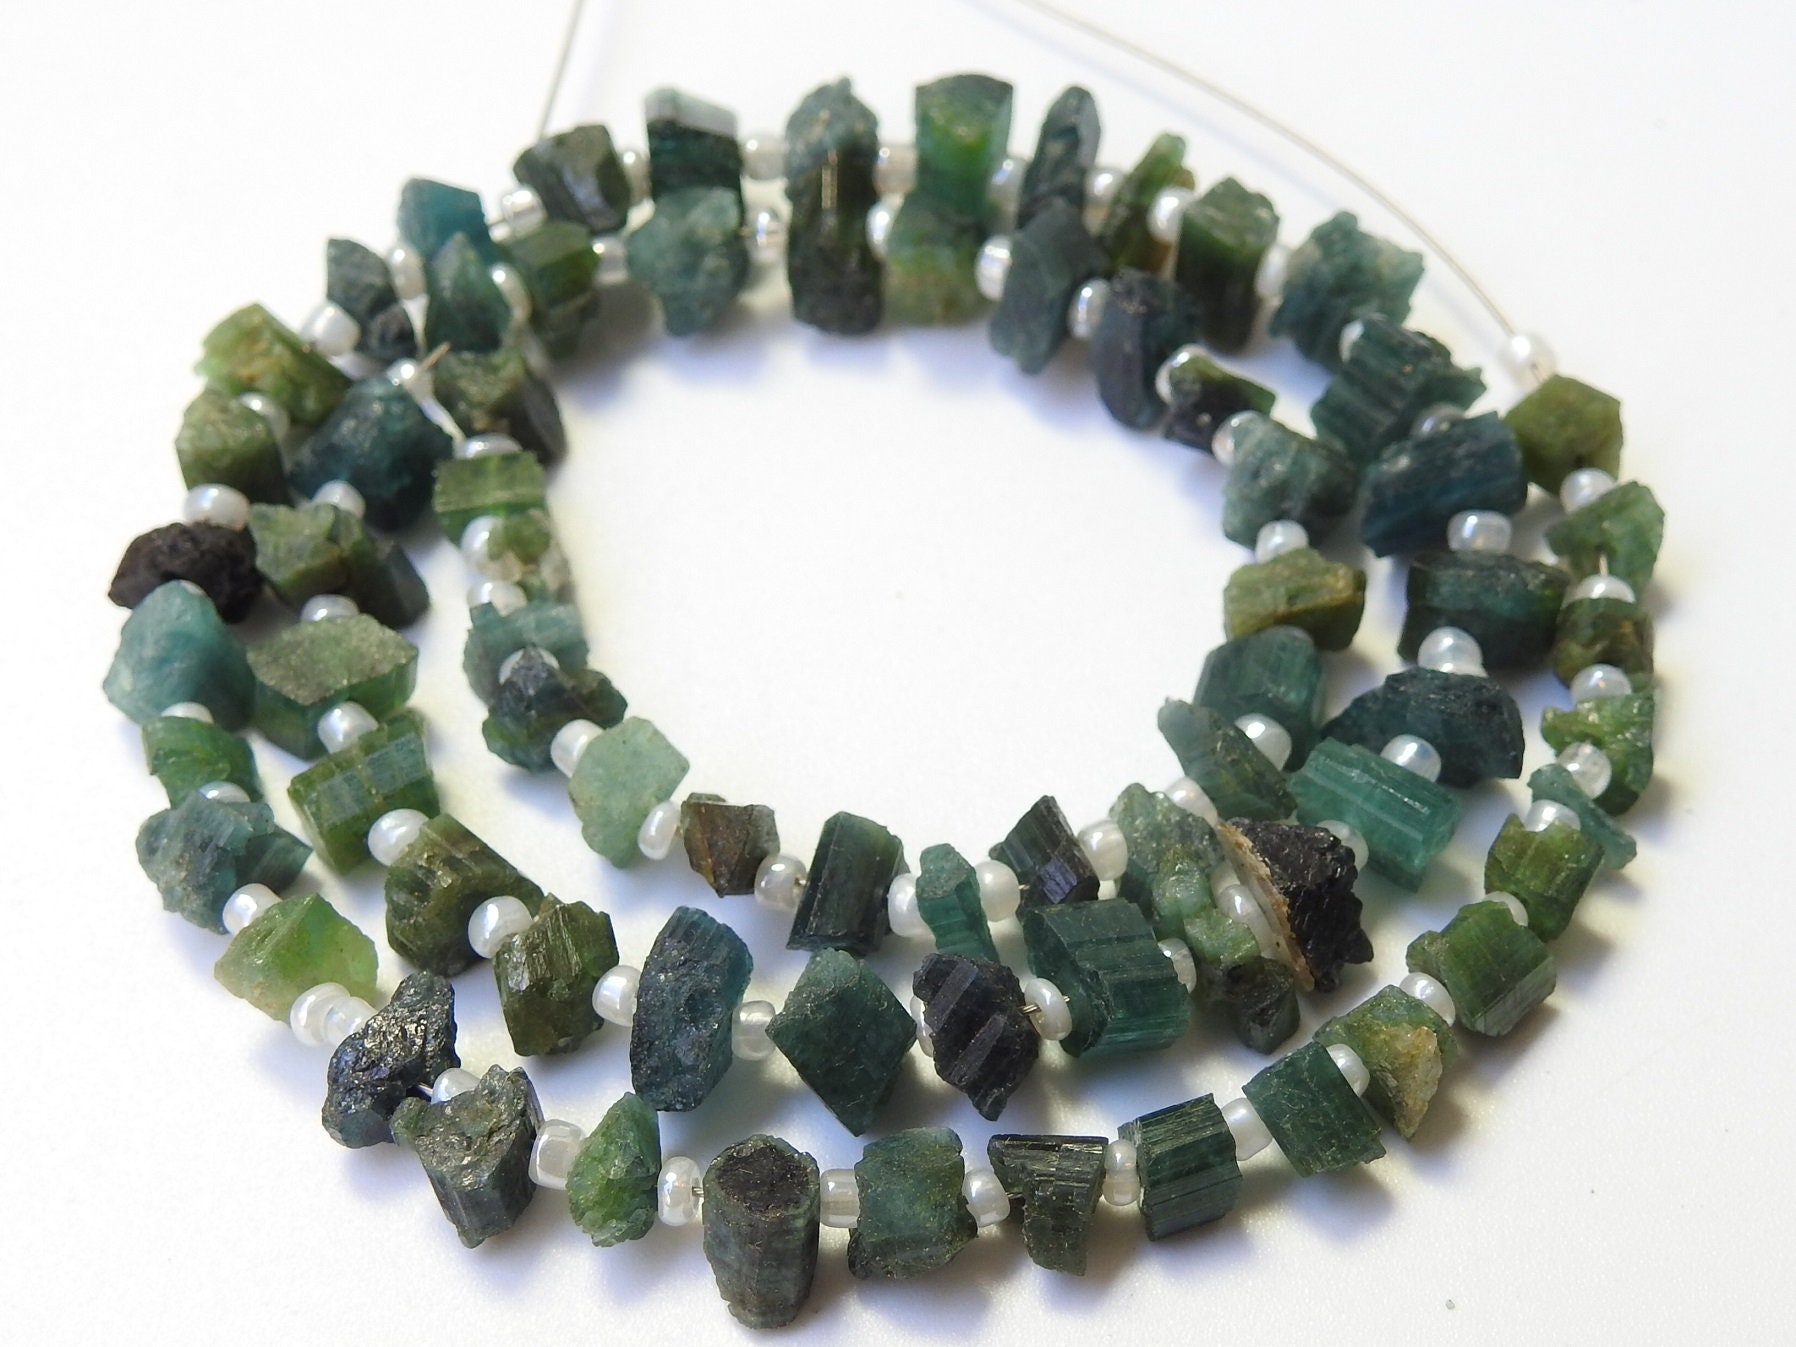 Green Tourmaline Natural Crystal Rough Beads,Chips,Uncut,Nuggets,Anklets,14Inchs Strand 6X3To4X3MM Approx,Wholesaler,Supplies,RB2 | Save 33% - Rajasthan Living 14